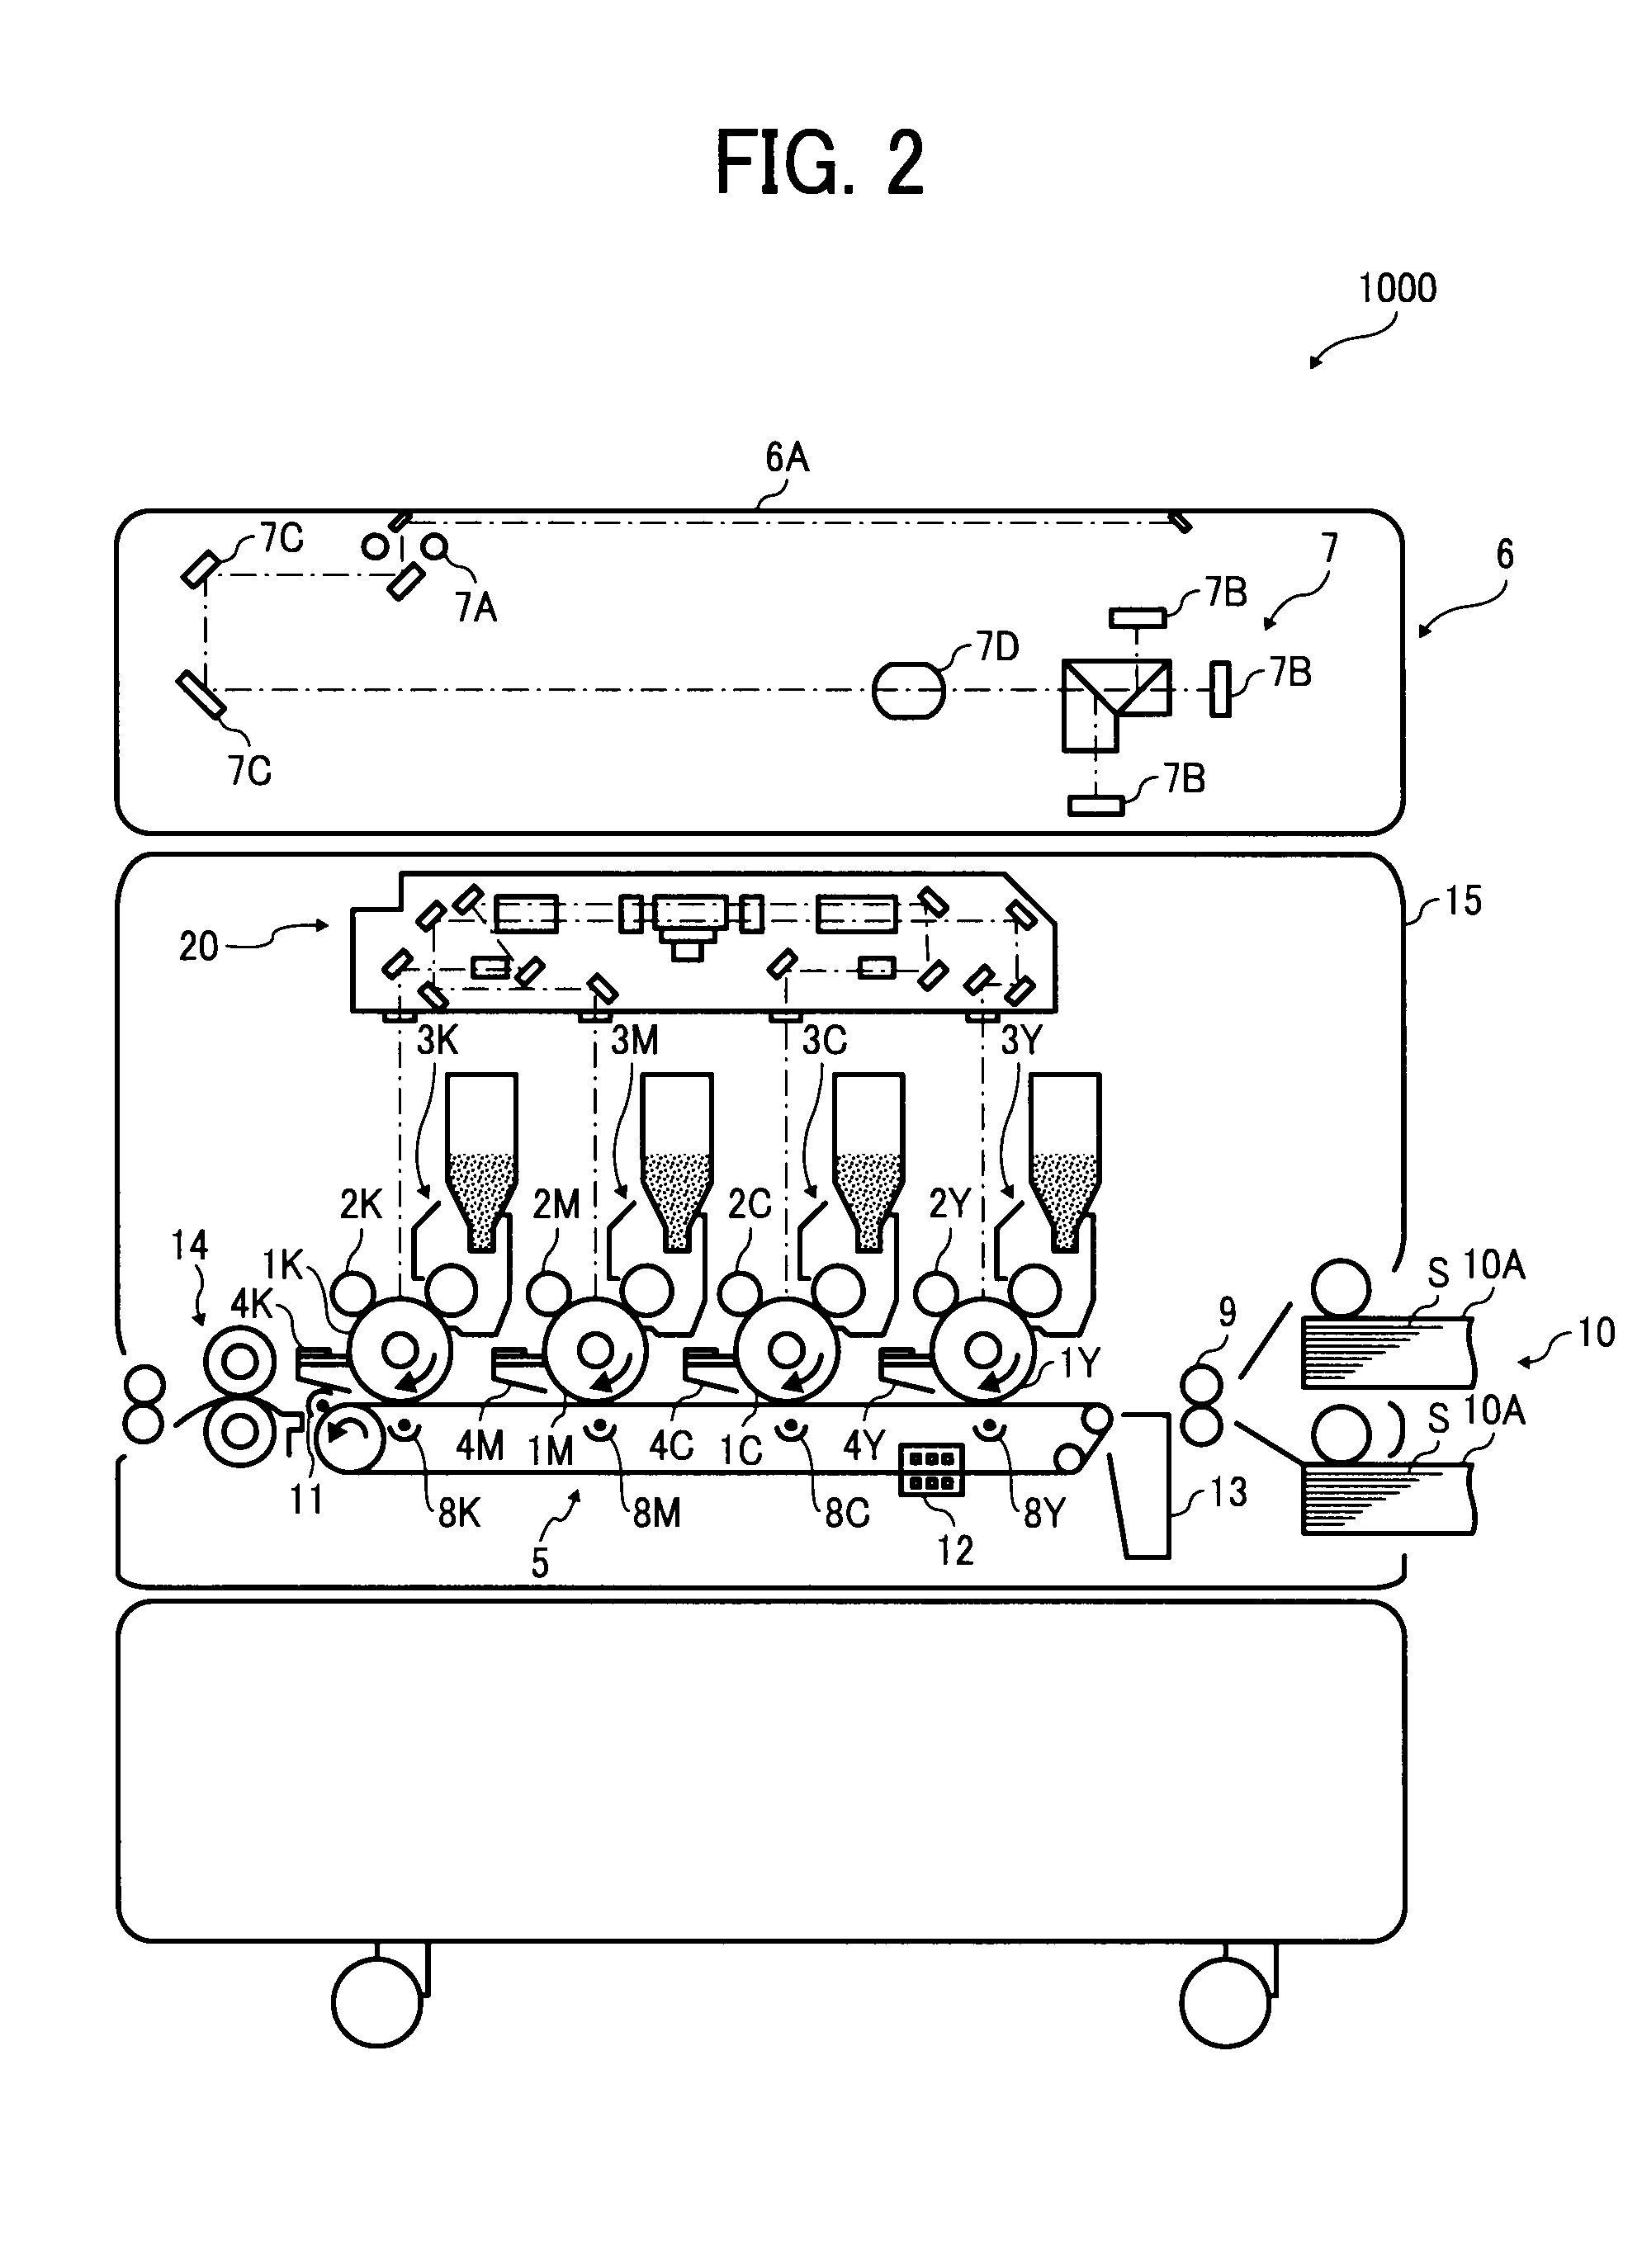 Image processing device, image forming apparatus including same, image processing method, and image processing program